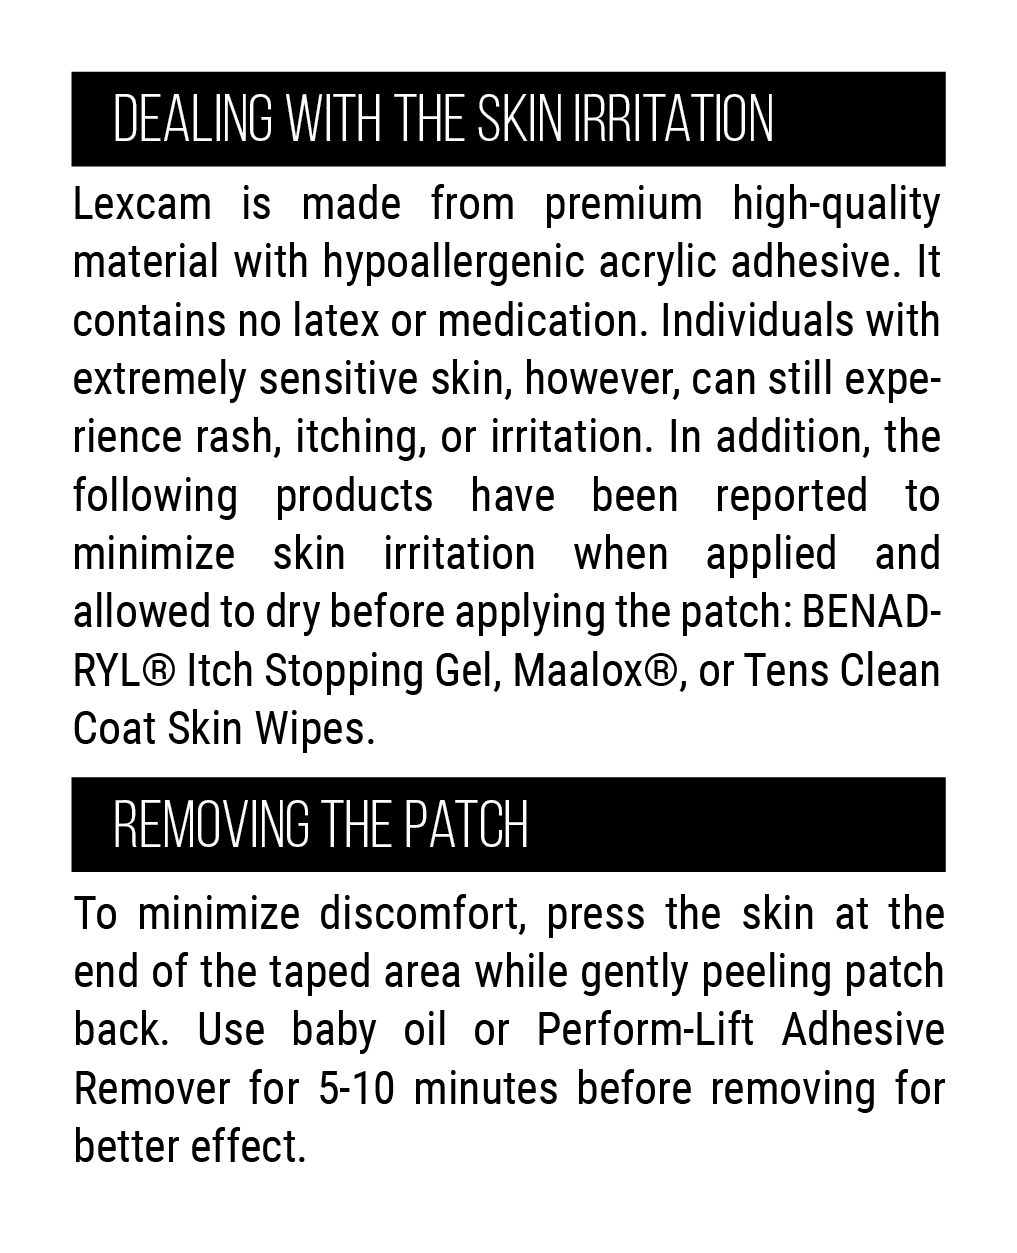 Lexcam Adhesive Waterproof  Patches Pre-Cut for Dexcom G6, Color Clear (30)